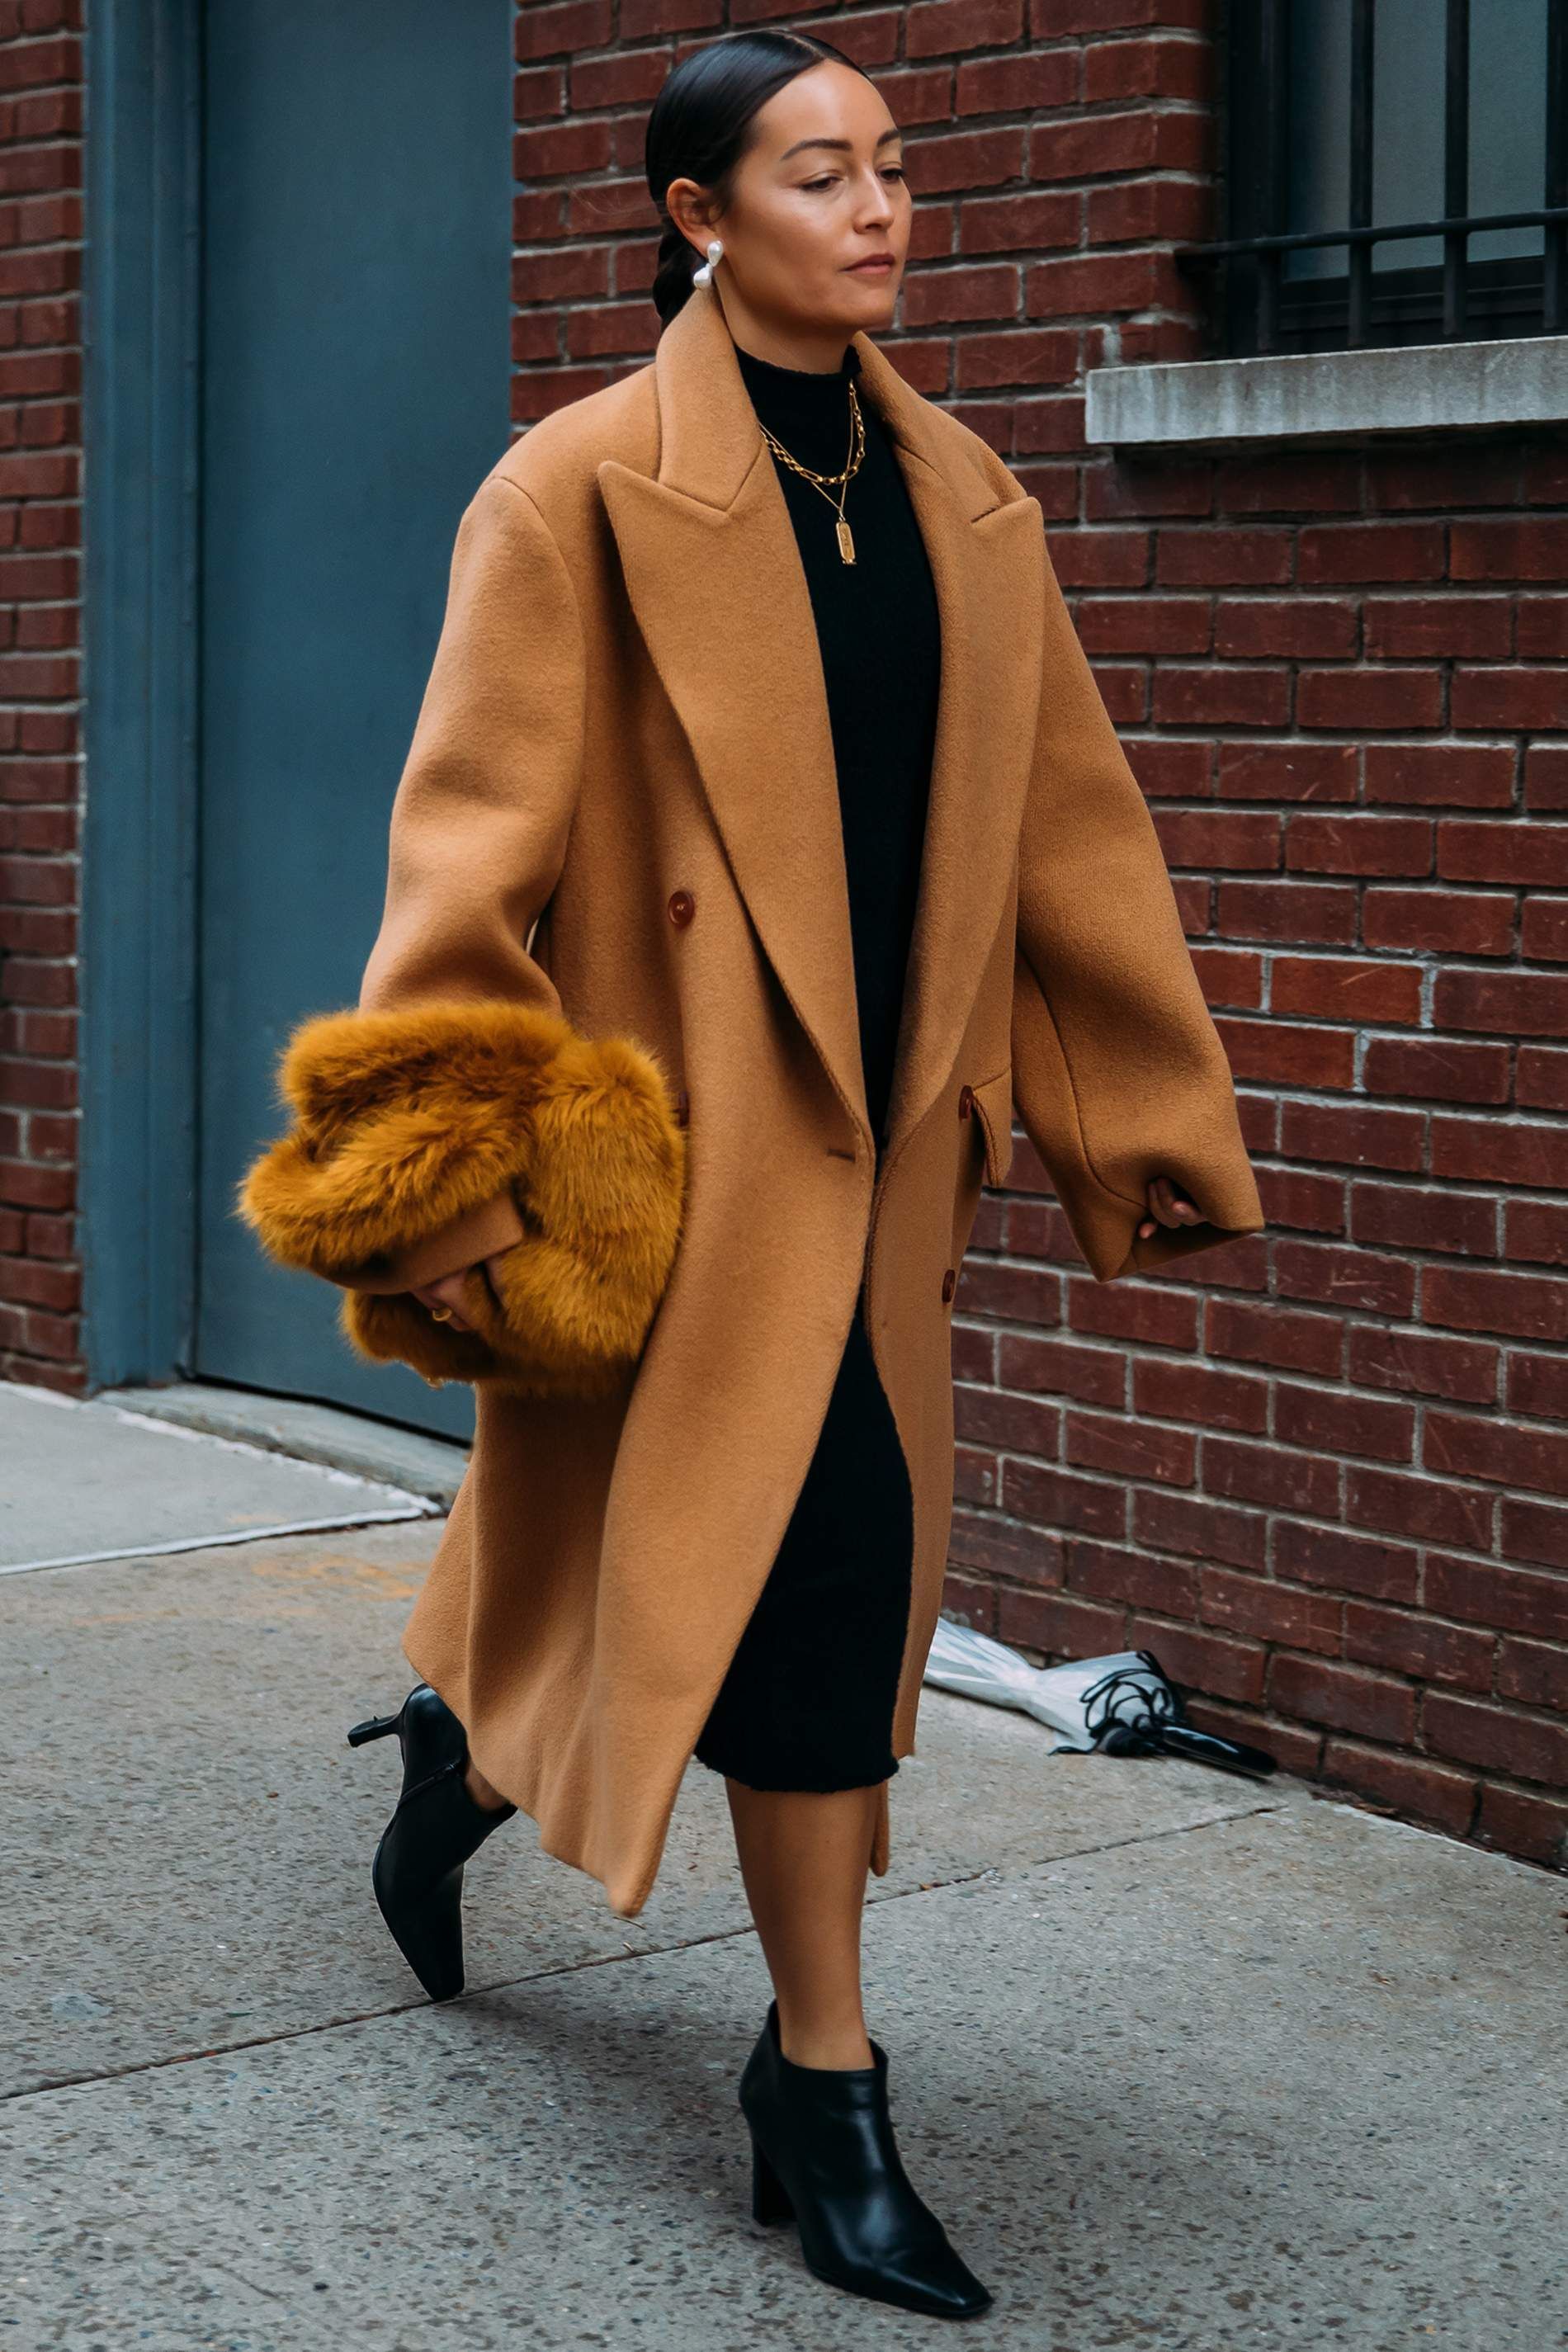 The best street-style from NYFW - The best street-style from NYFW -   18 style Fashion new york ideas